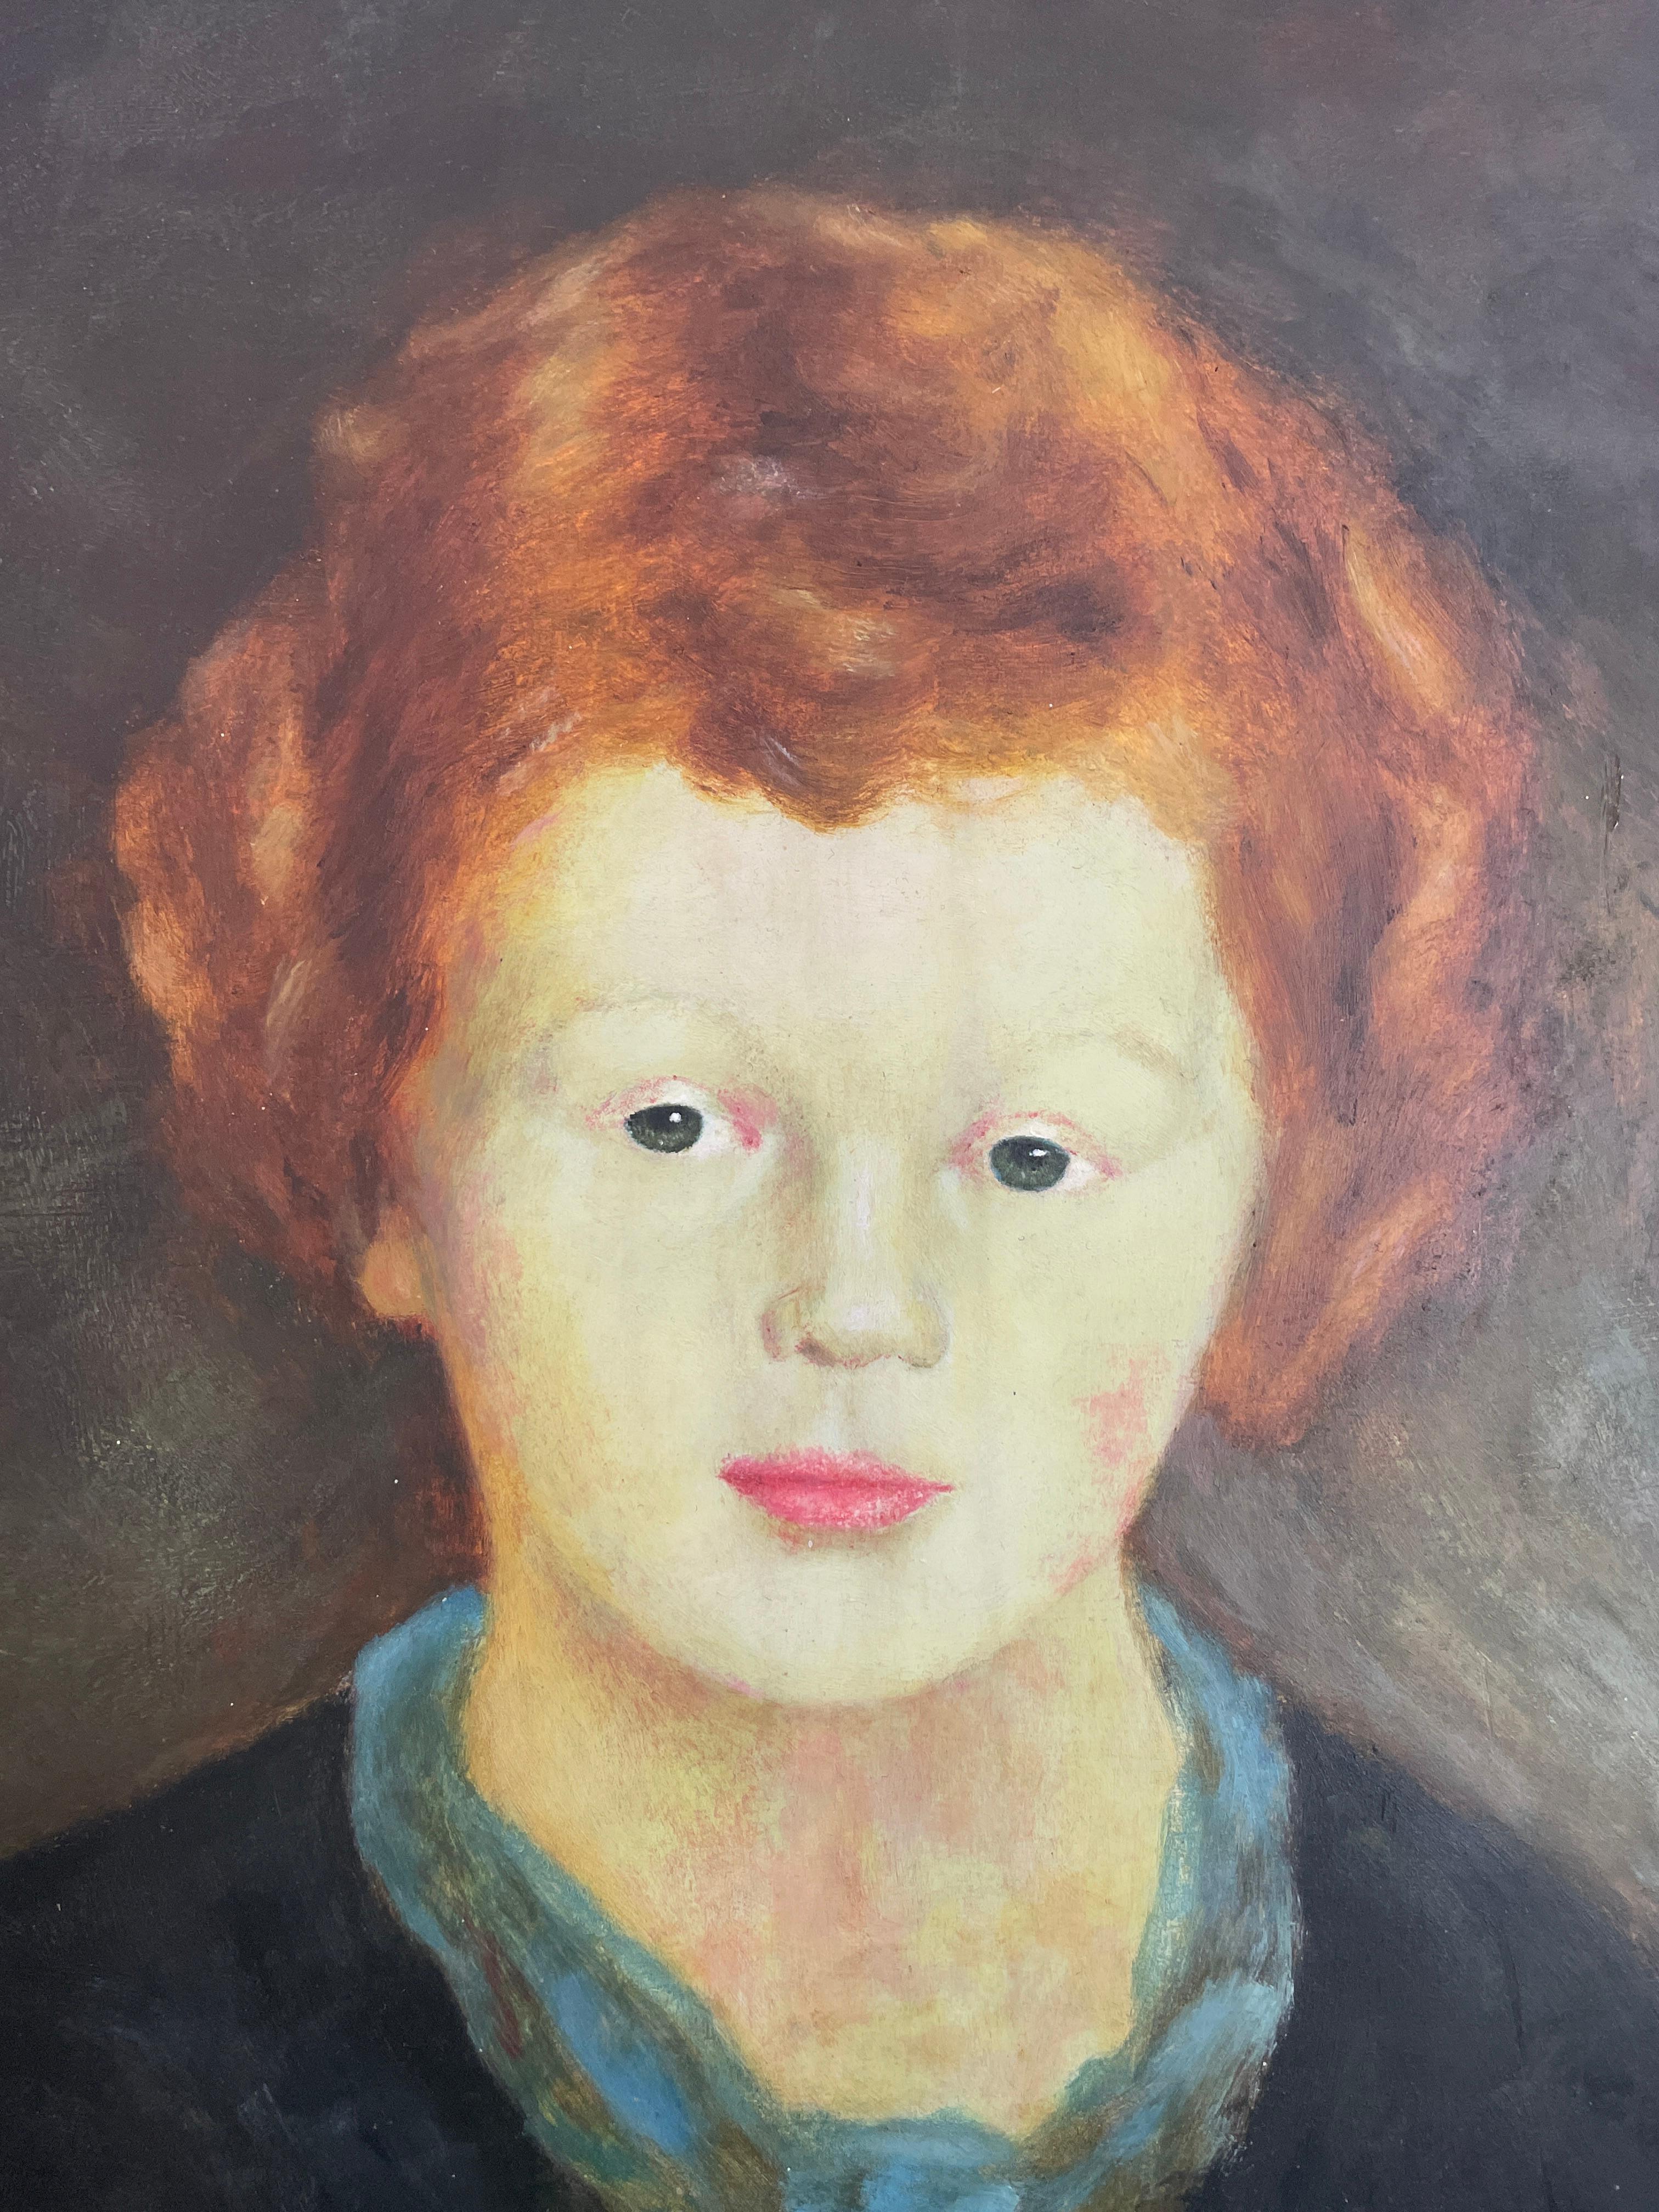 Portrait of a Young Child by E. Shulz
Oil paint on board.